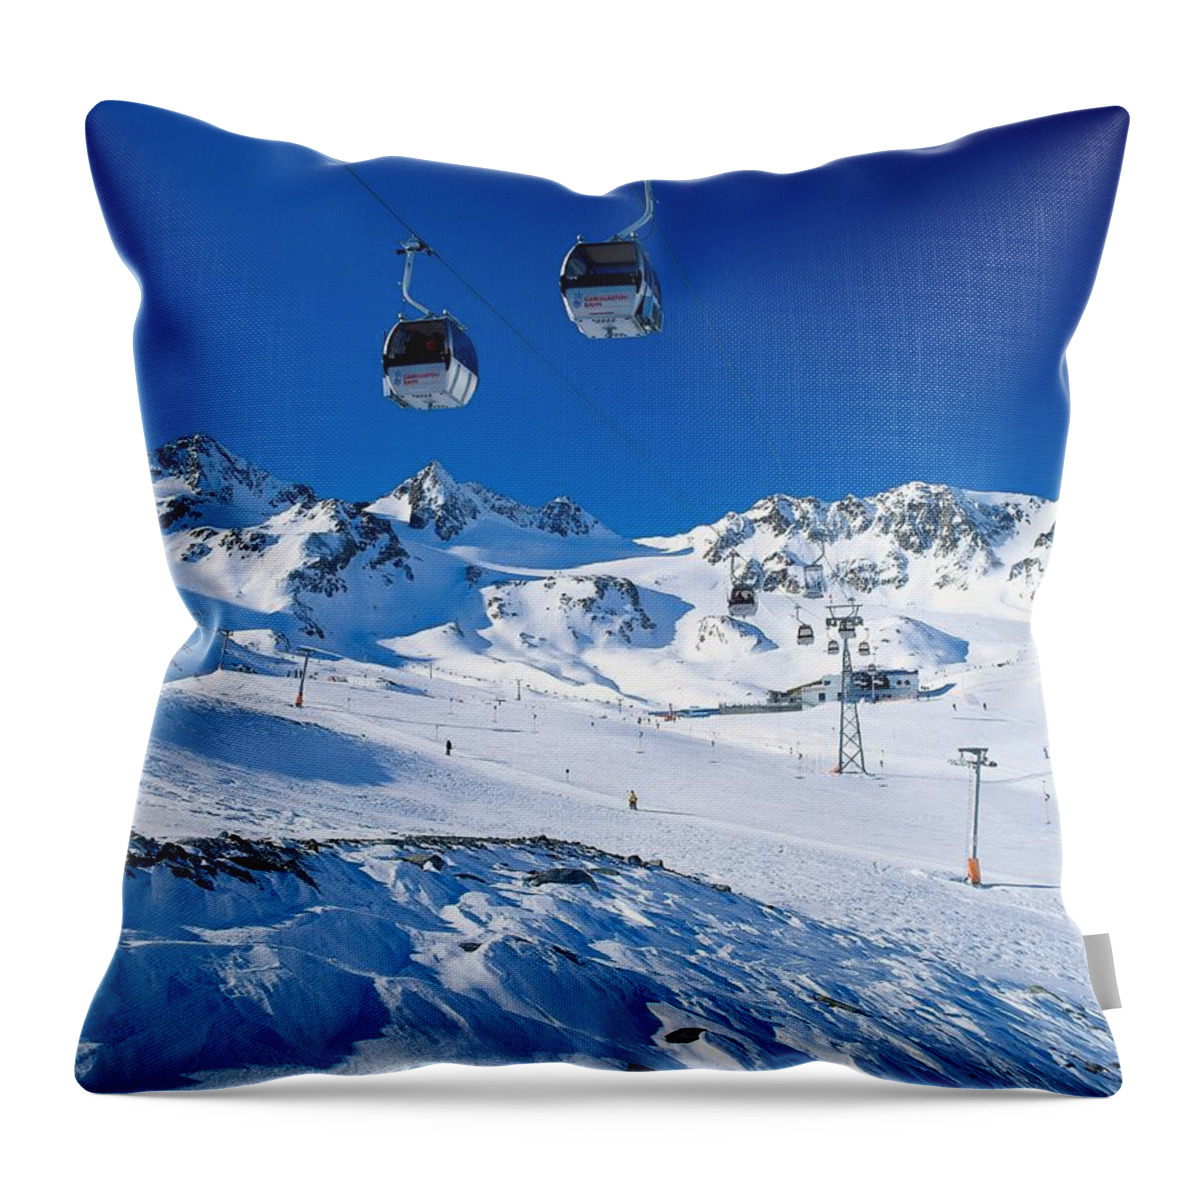 Estock Throw Pillow featuring the digital art Snow Covered Mountains & Cable Cars by Reinhard Schmid